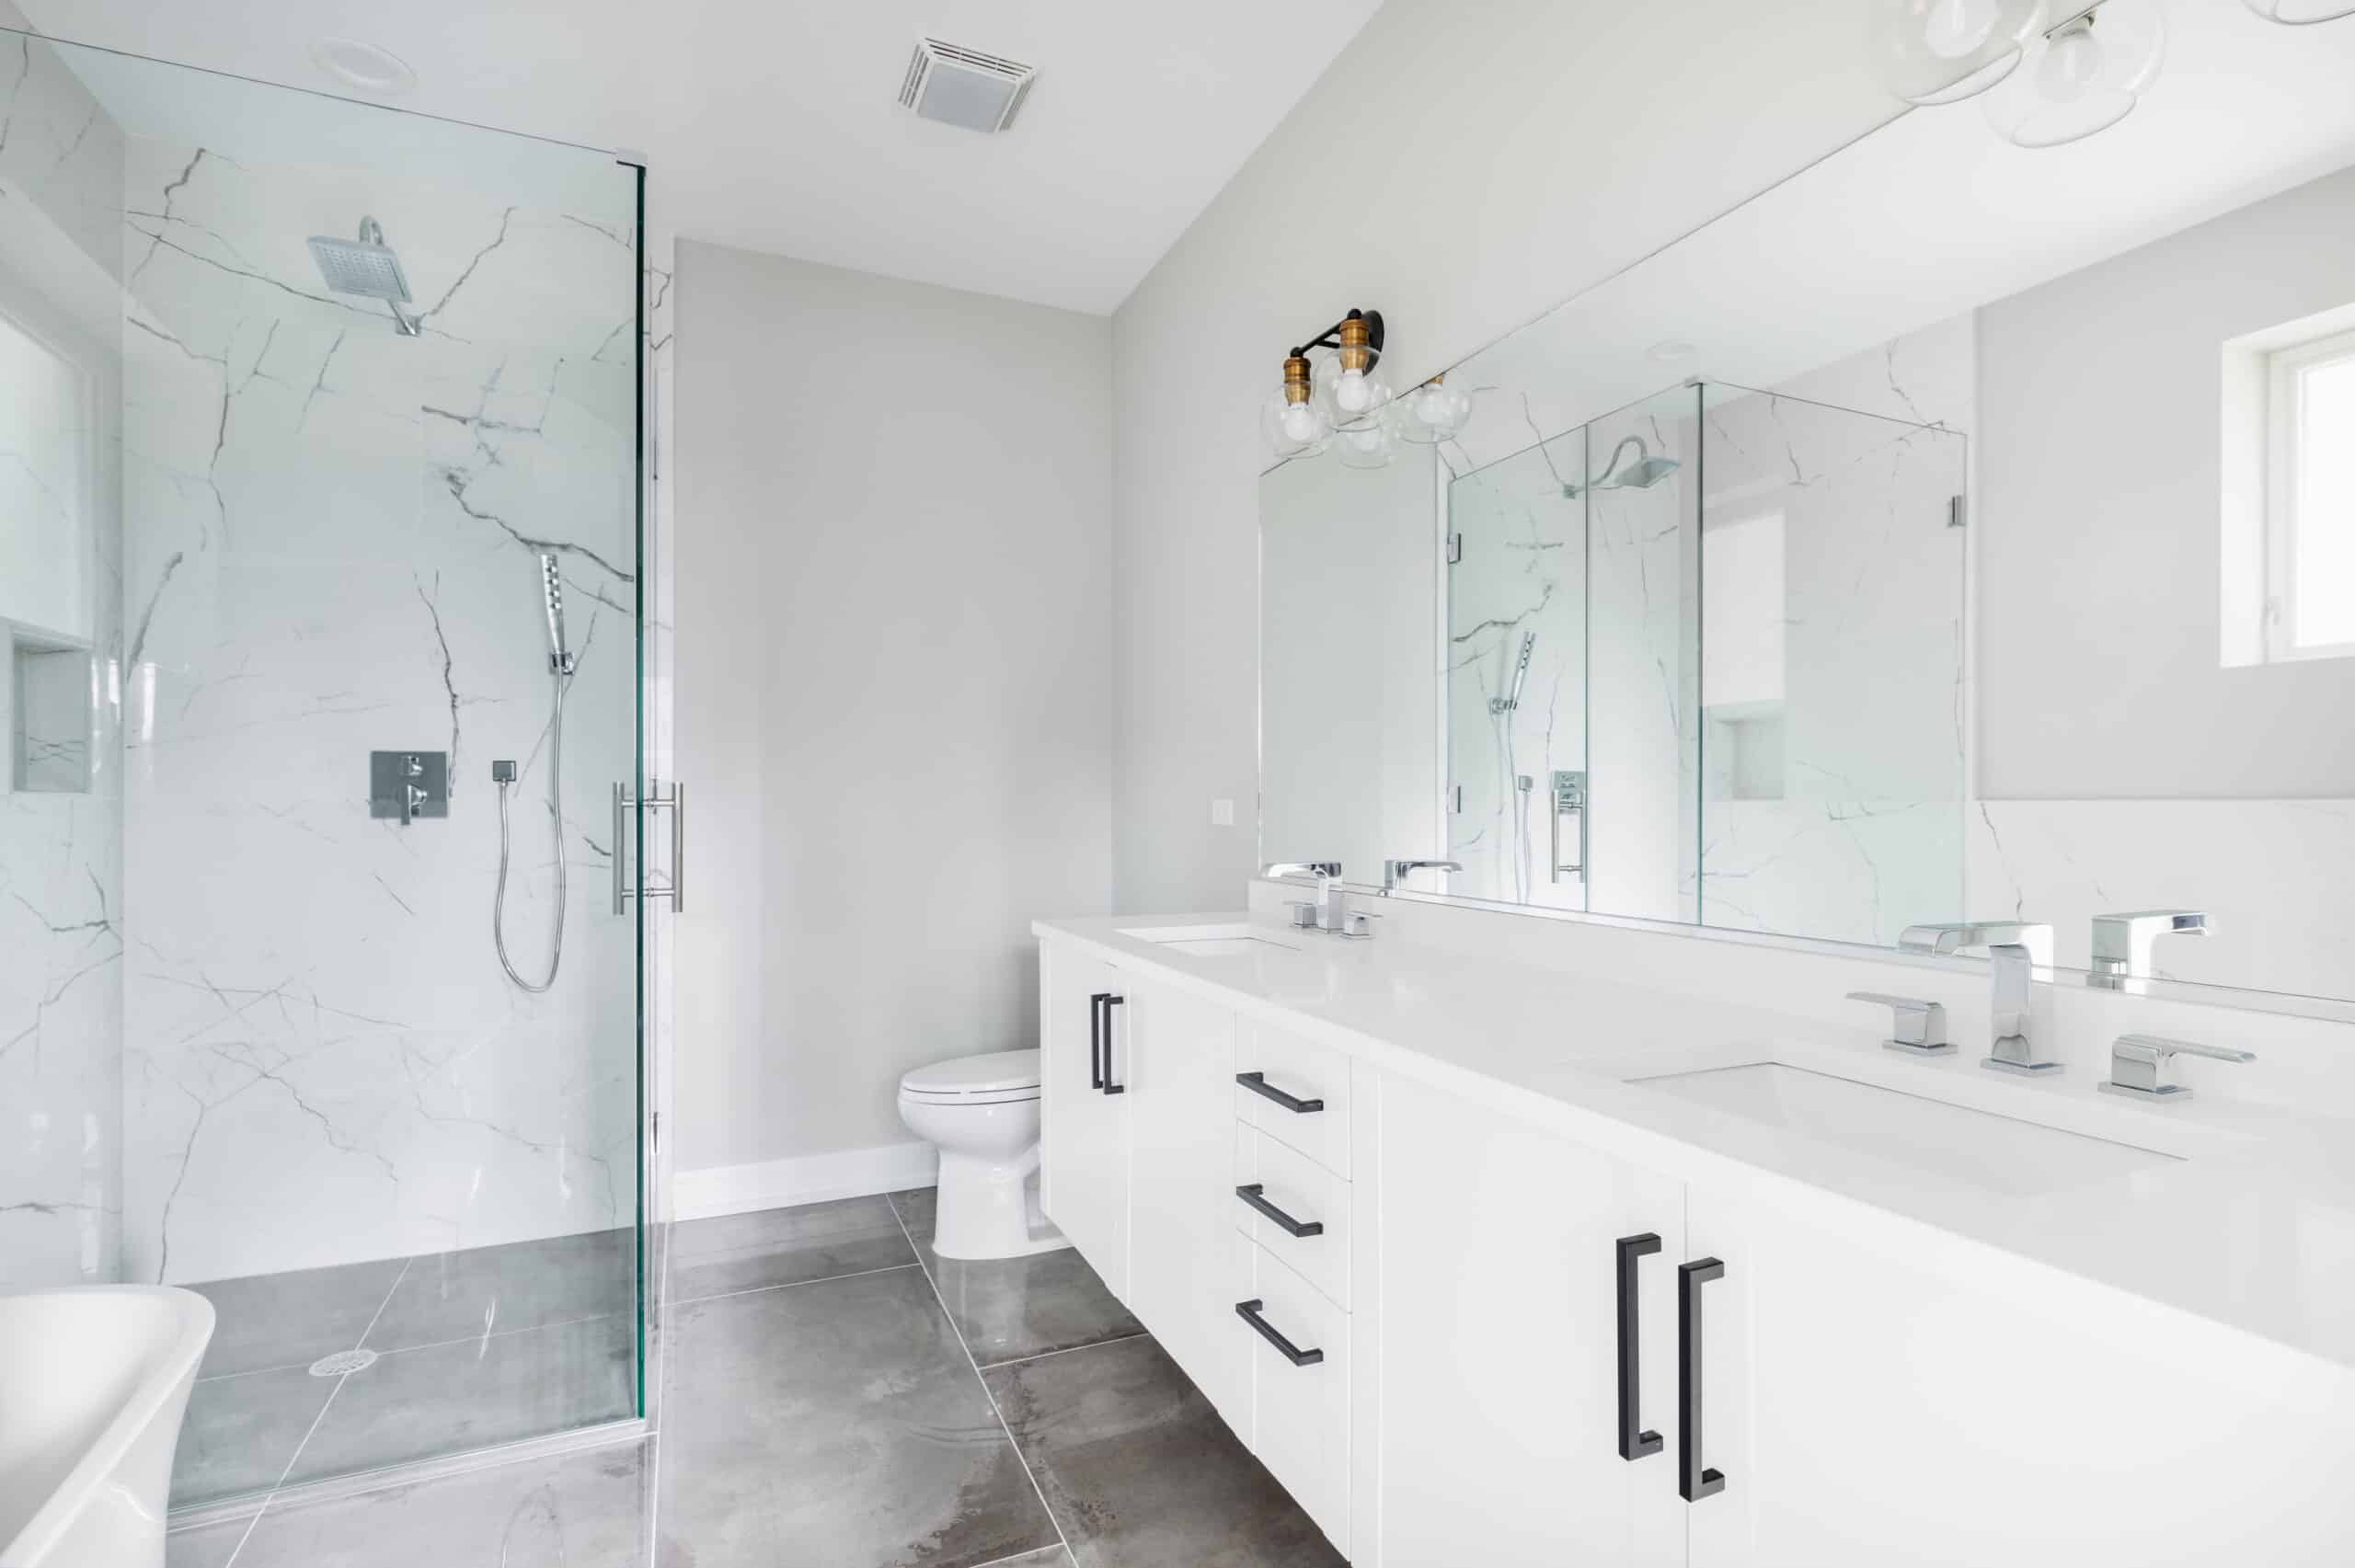 A contemporary, white luxury bathroom with black hardware and chrome fixtures